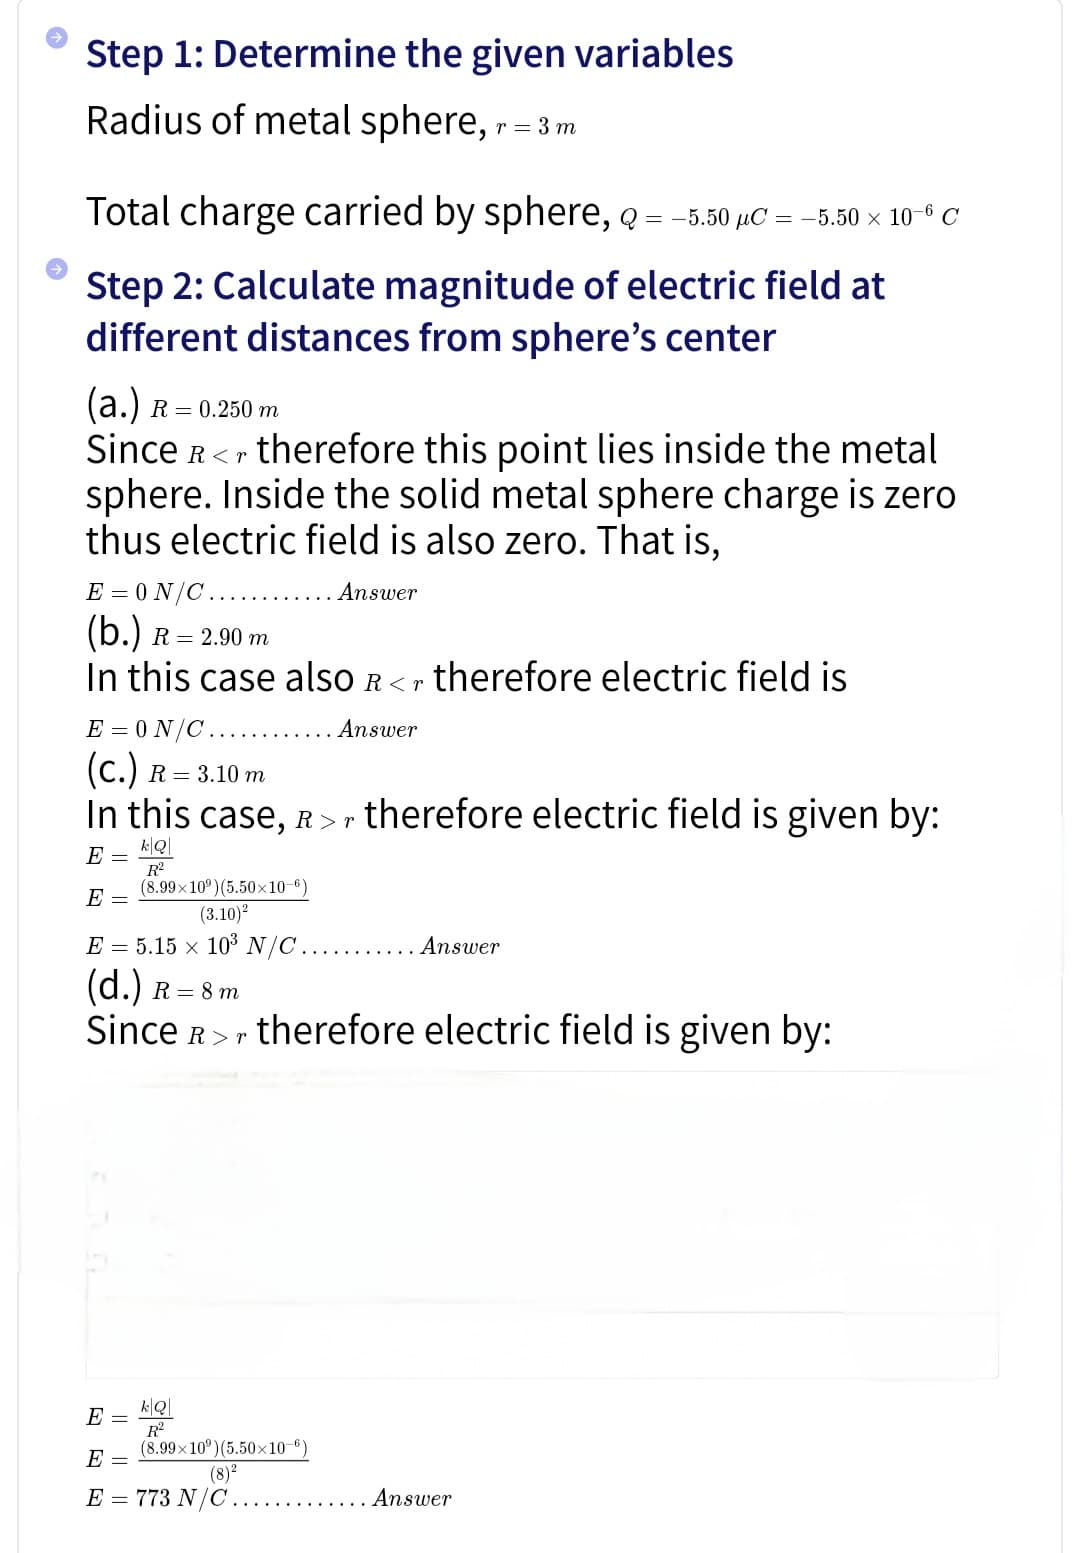 Step 1: Determine the given variables
Radius of metal sphere, r = 3m
Total charge carried by sphere, q
= -5.50 μC = -5.50 × 106 C
Step 2: Calculate magnitude of electric field at
different distances from sphere's center
(a.) R = 0.250 m
Since R
therefore this point lies inside the metal
sphere. Inside the solid metal sphere charge is zero
thus electric field is also zero. That is,
E=0N/C
(b.) R = 2.90 m
Answer
In this case also R<r therefore electric field is
E=0N/C.......
(c.)
R = 3.10 m
. Answer
In this case, R>r therefore electric field is given by:
E =
E =
k|Q
R²
(8.99x10°)(5.50×10-6)
(3.10)2
E=5.15 x 103 N/C .......... Answer
(d.) R = 8 m
Since R therefore electric field is given by:
k|Q|
E
R²
E =
(8.99×10°)(5.50×10-6)
(8)2
E = 773 N/C..
. Answer